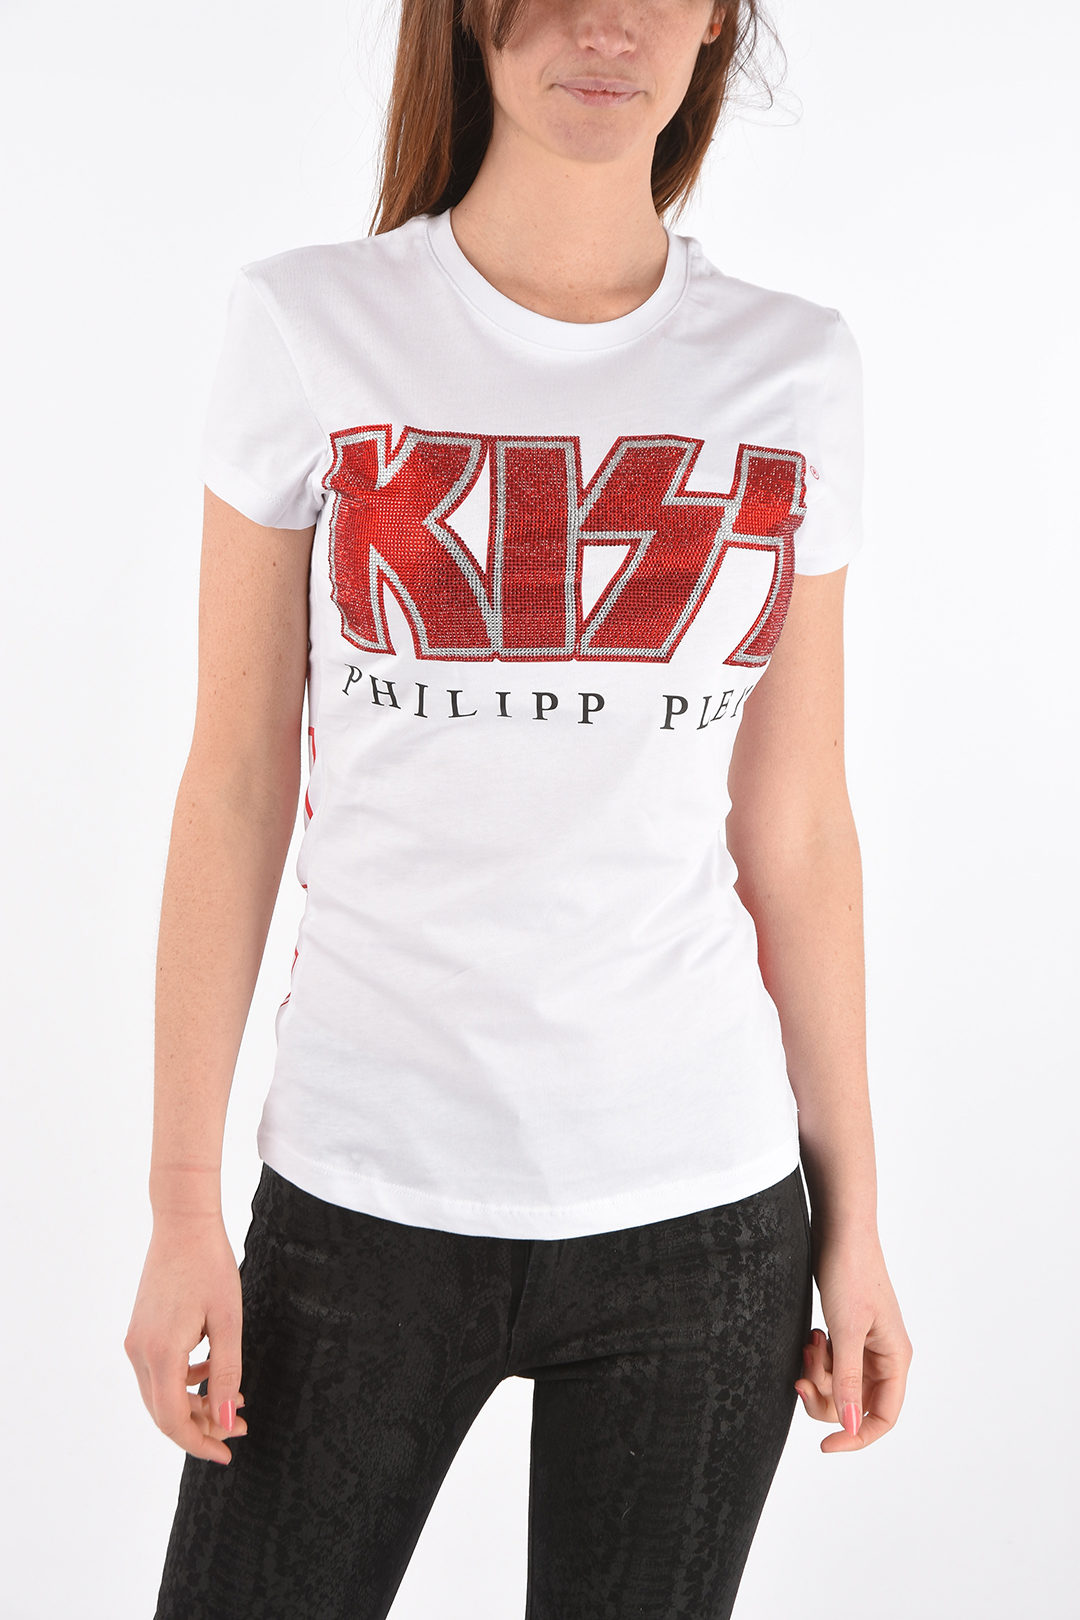 nemen Terzijde Uitdaging Philipp Plein COUTURE KISS crew-neck t-shirt with with Rhinestone  Embellishment on the front women - Glamood Outlet